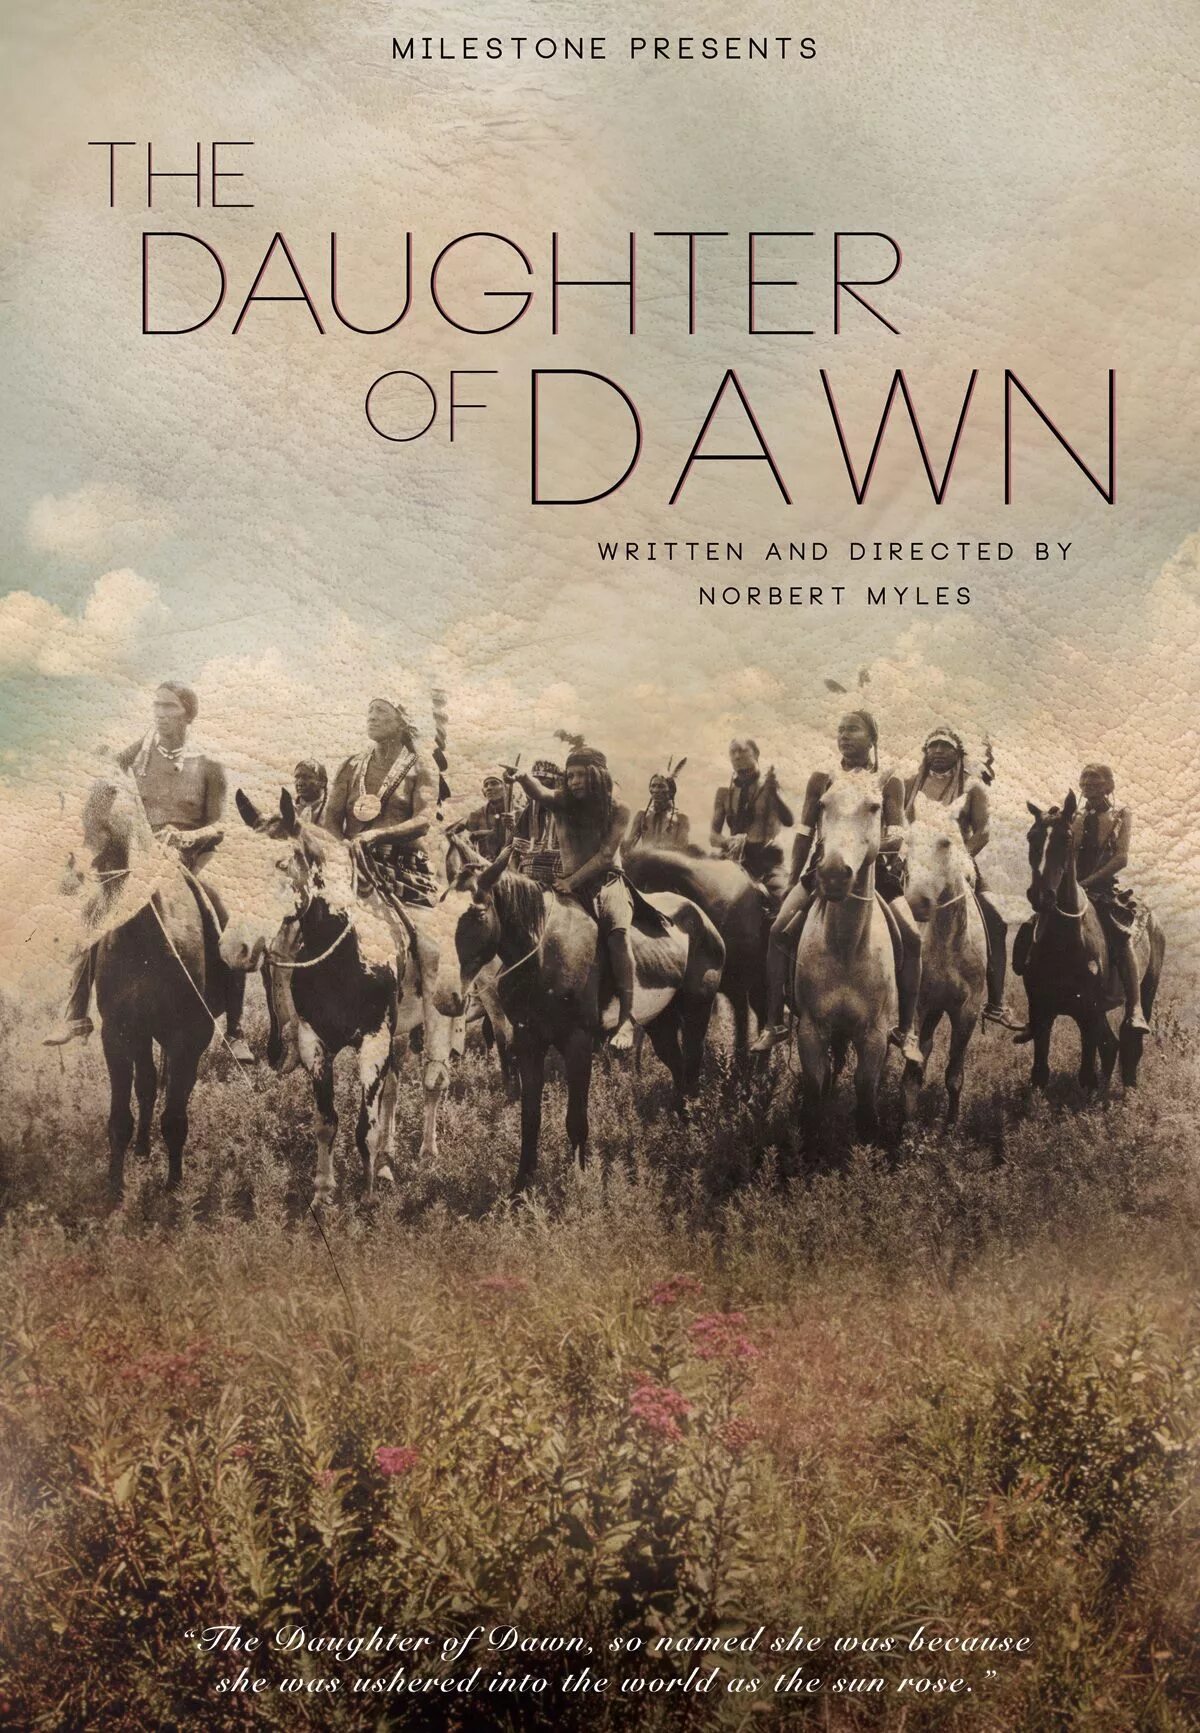 Daughters of the North. Kotipelto waiting for the Dawn. Lost Nation. Daughter of the year